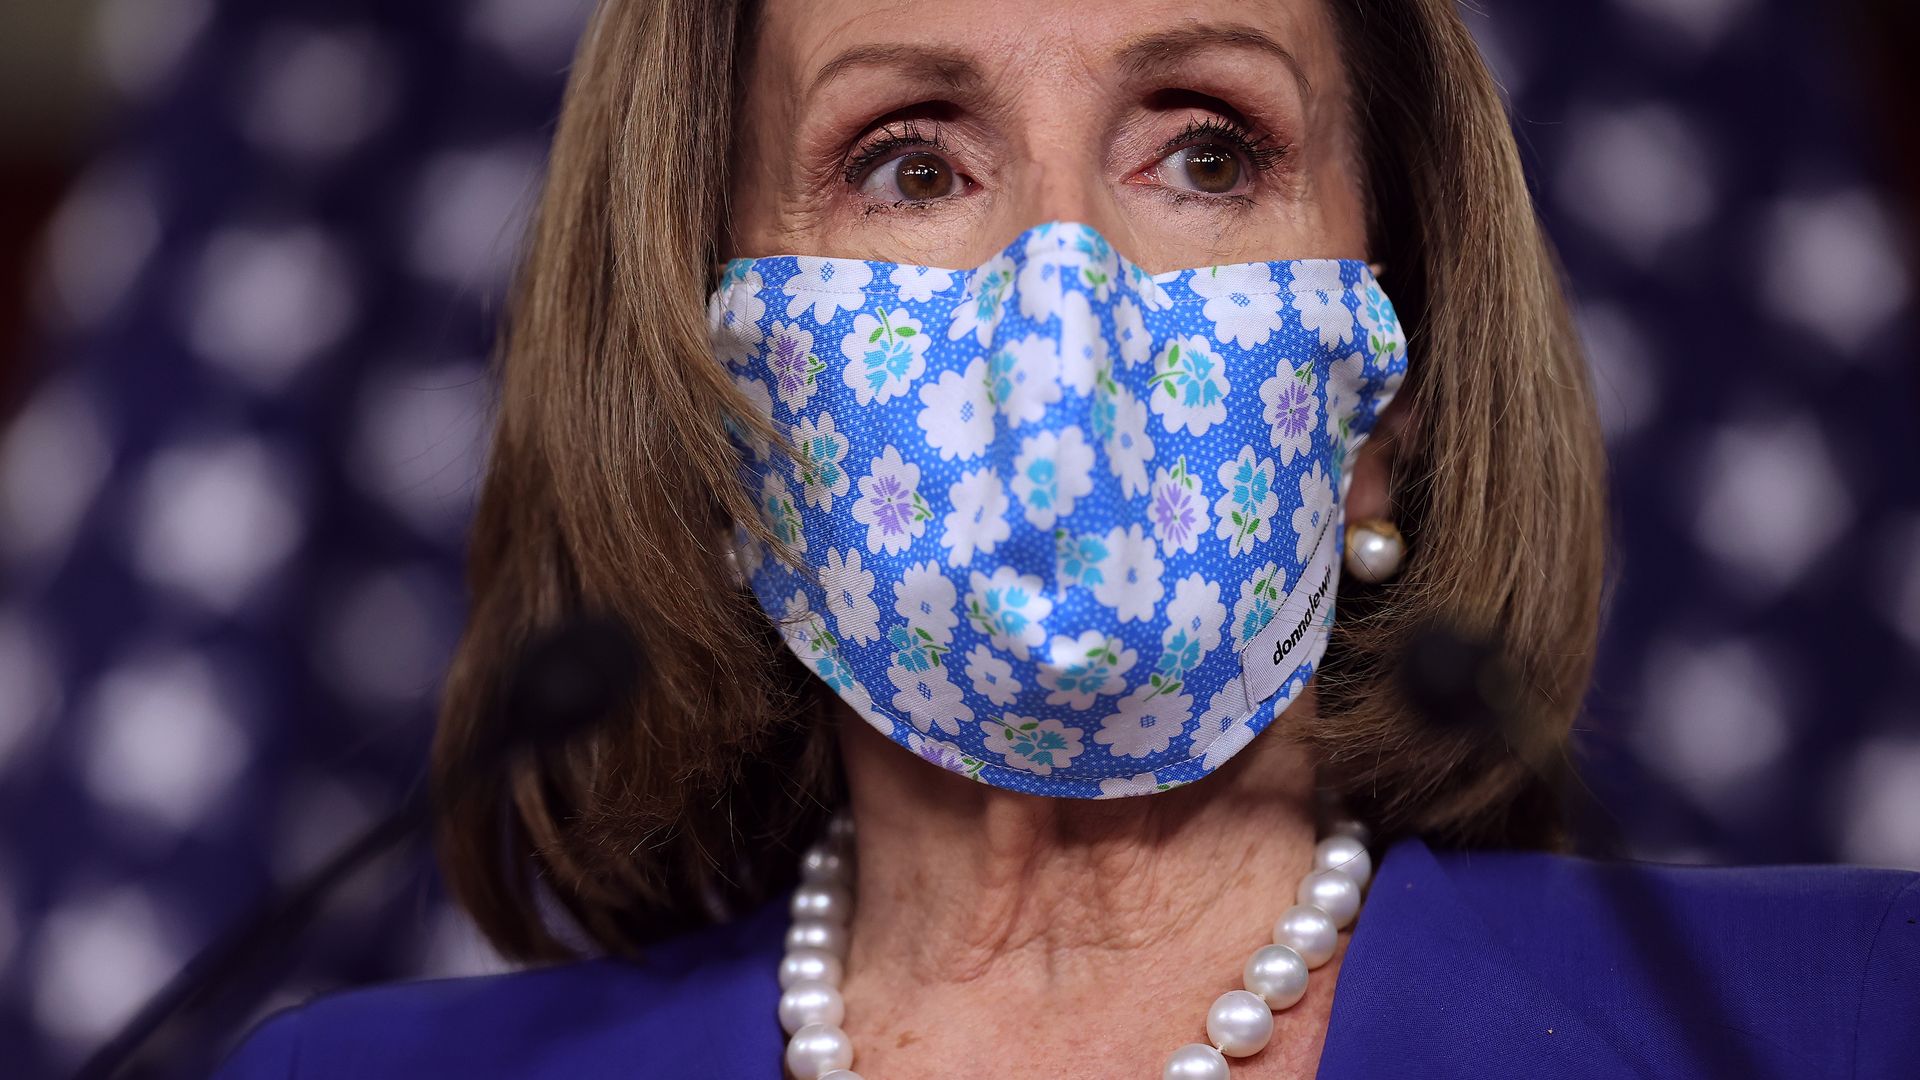 U.S. House Speaker Nancy Pelosi (D-Calif.) wears a protective mask during a news conference at the U.S. Capitol in Washington, D.C.